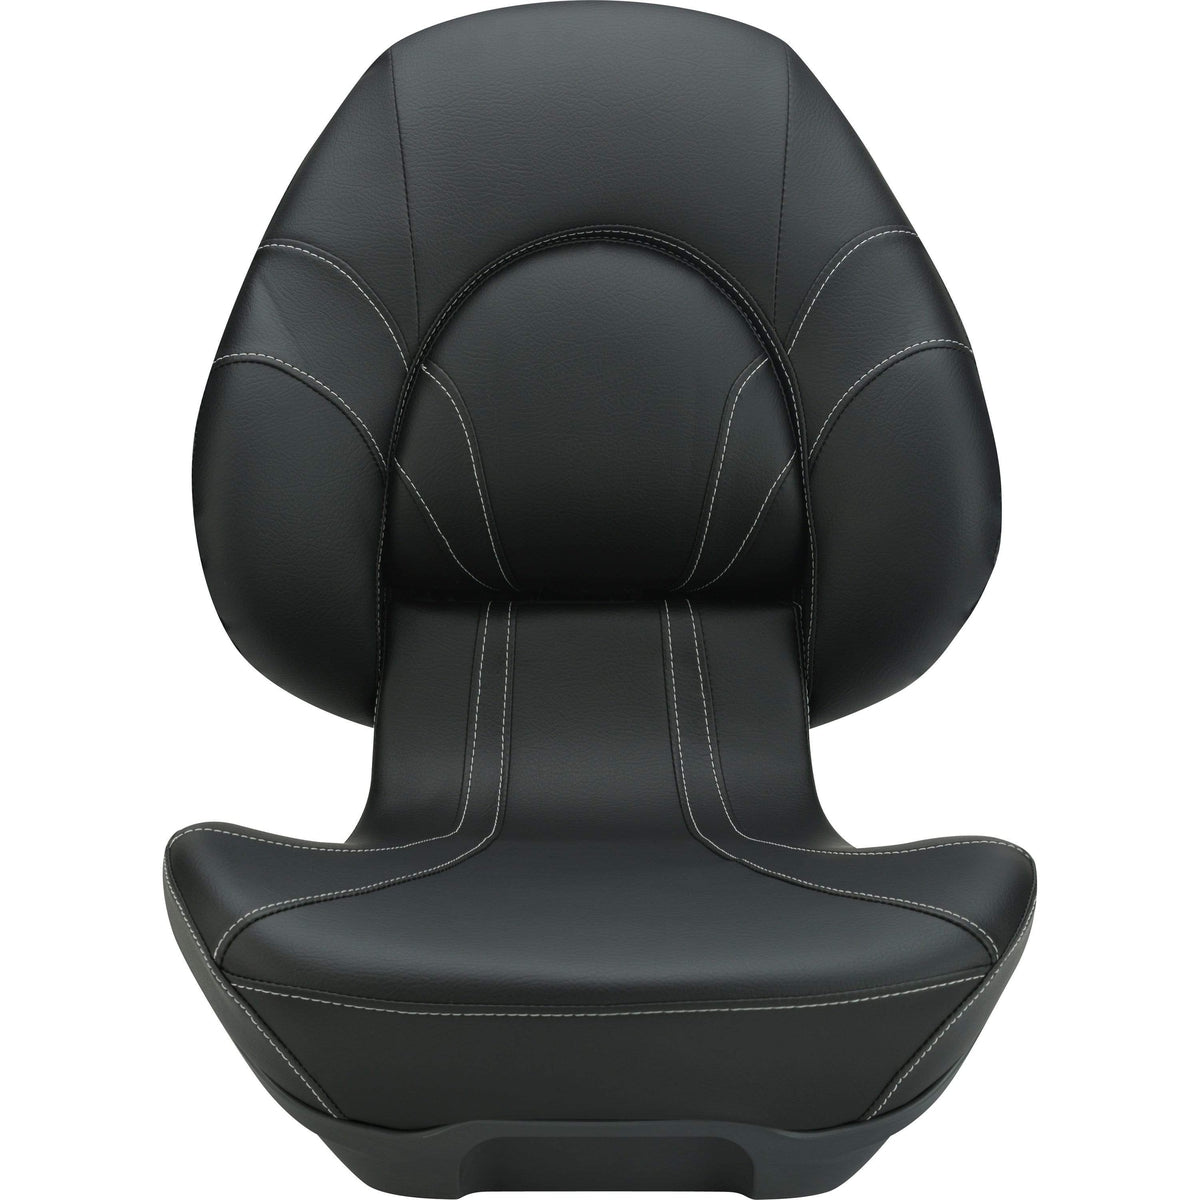 Attwood Marine Not Qualified for Free Shipping Attwood Centrix X 97S Seat Black/Black #97S05BK-2